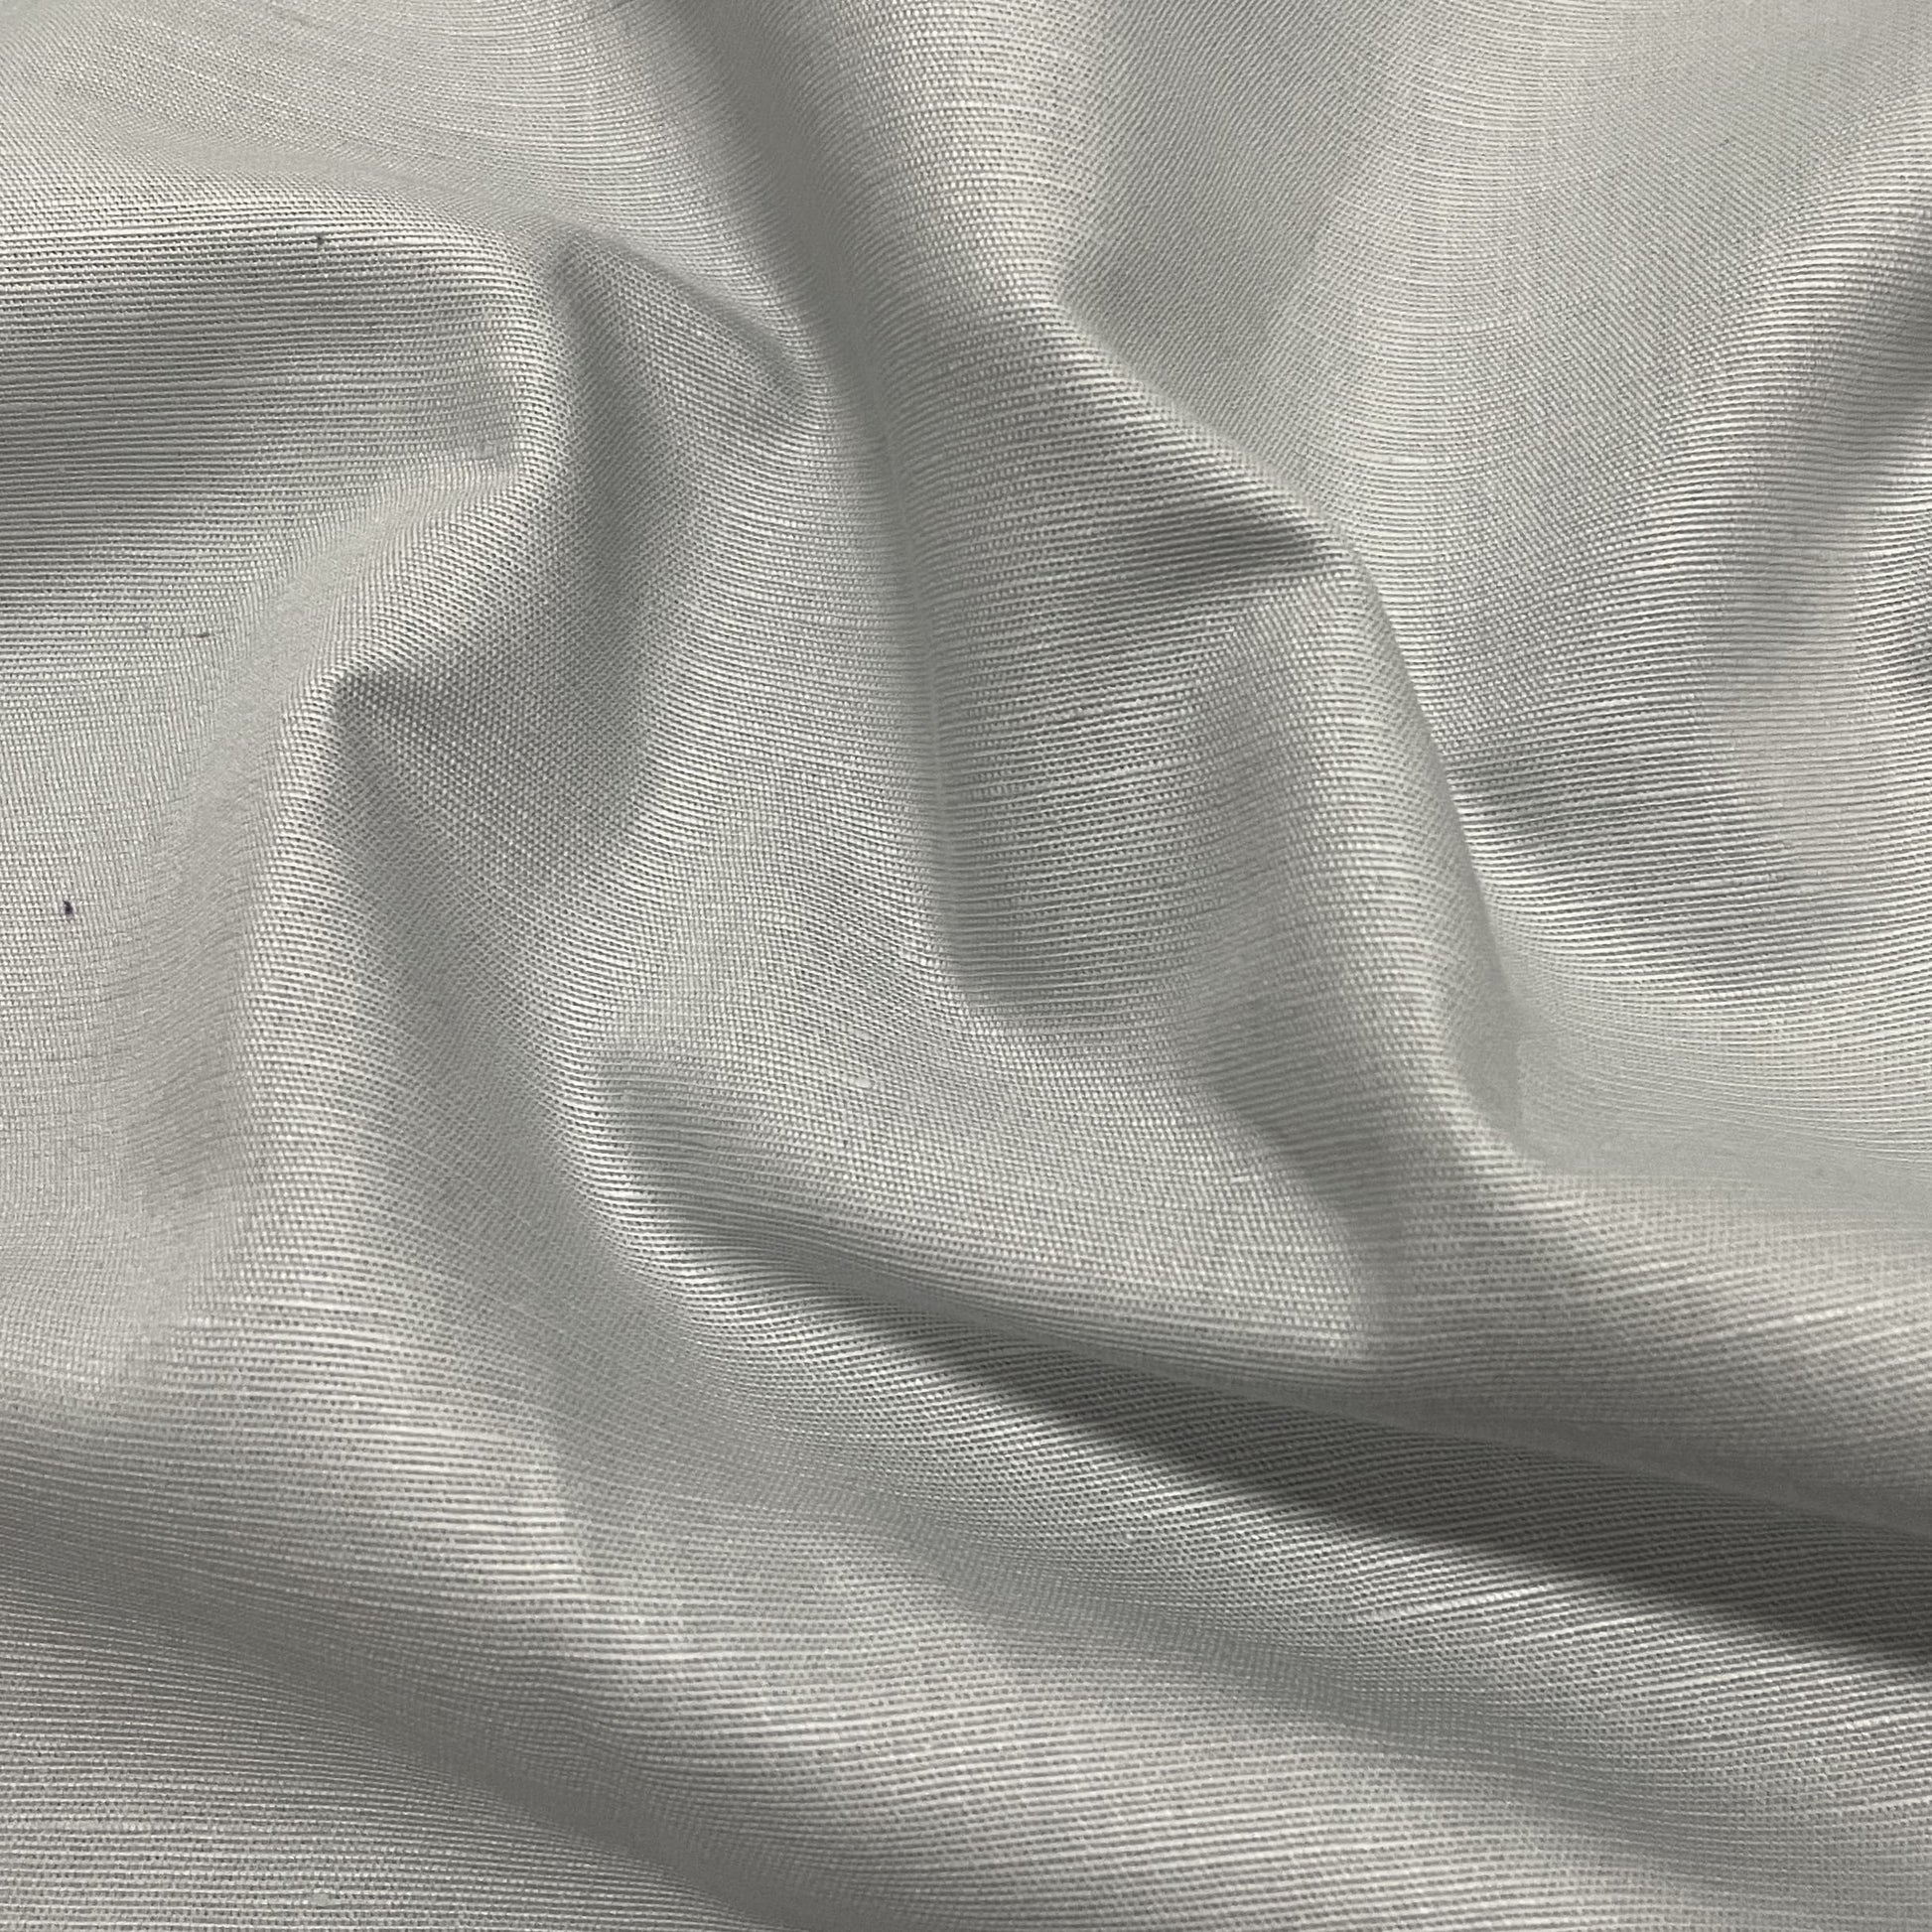 Grey Solid Cotton Linen Fabric